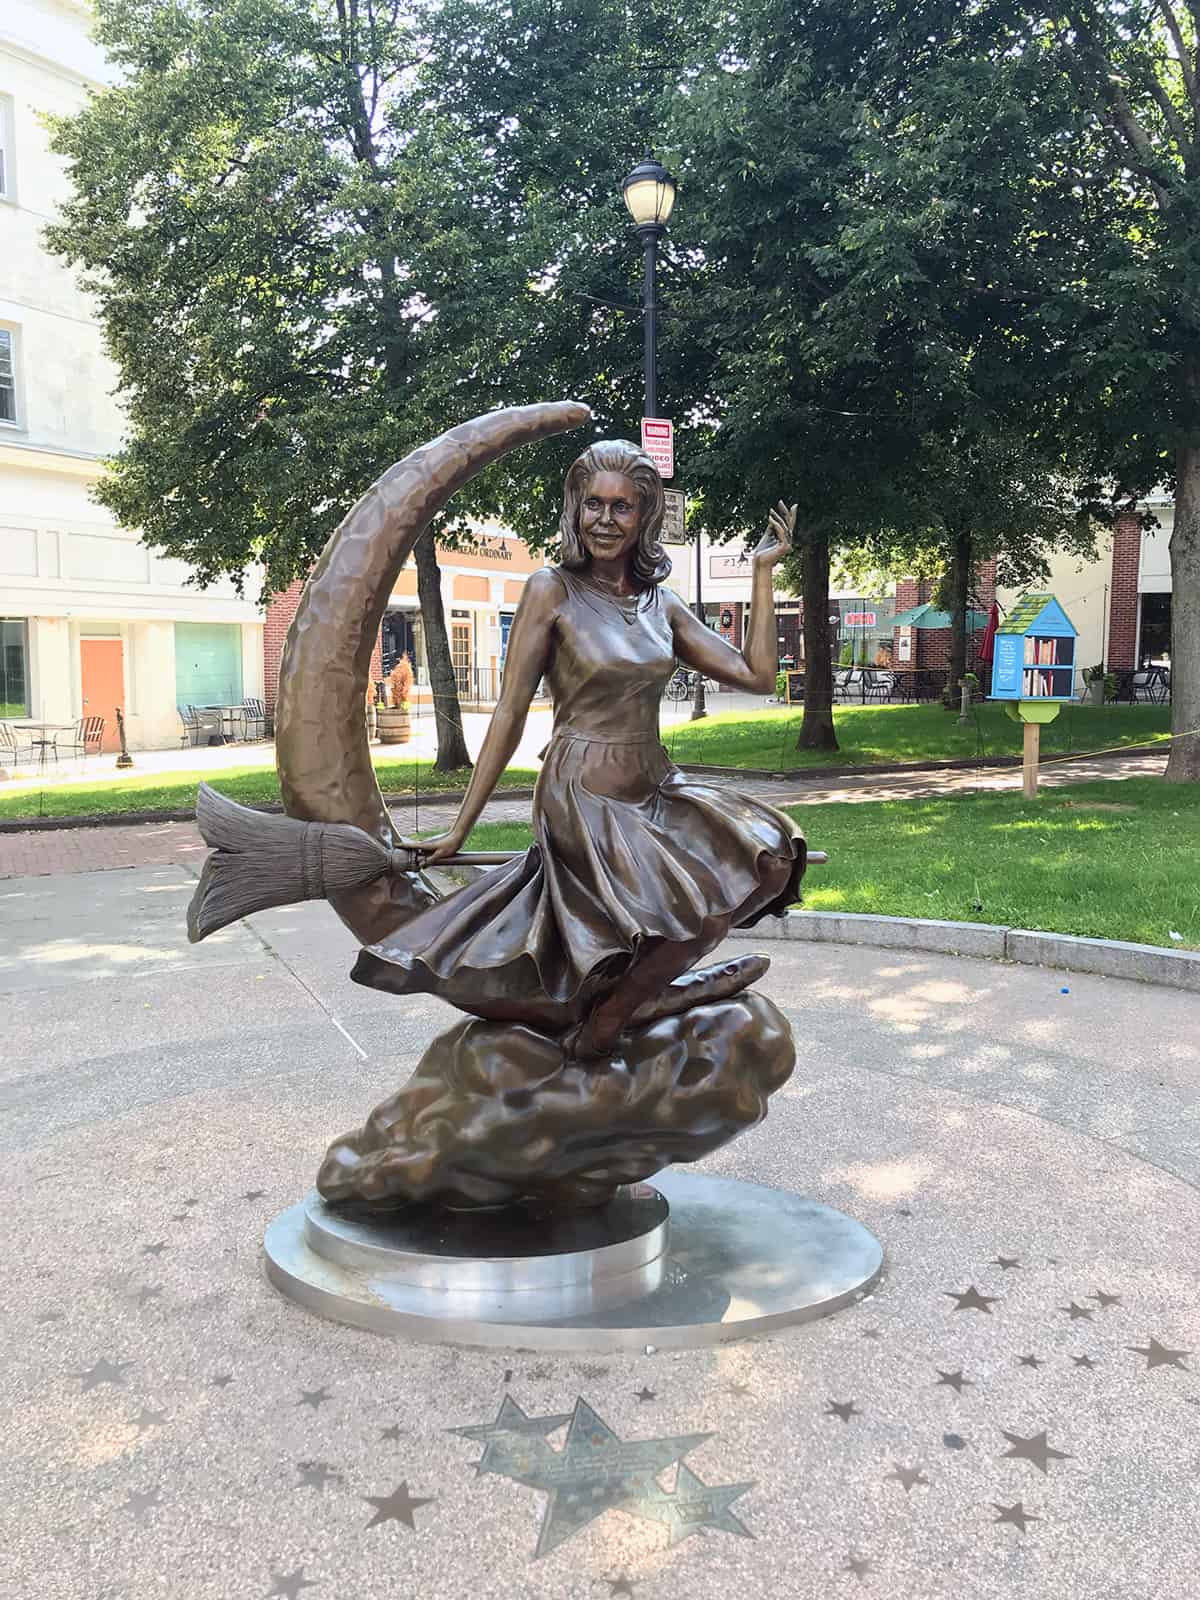 The Bewitched Sculpture honors Elizabeth Montgomery, the actress on Bewitched TV Show in Salem MA